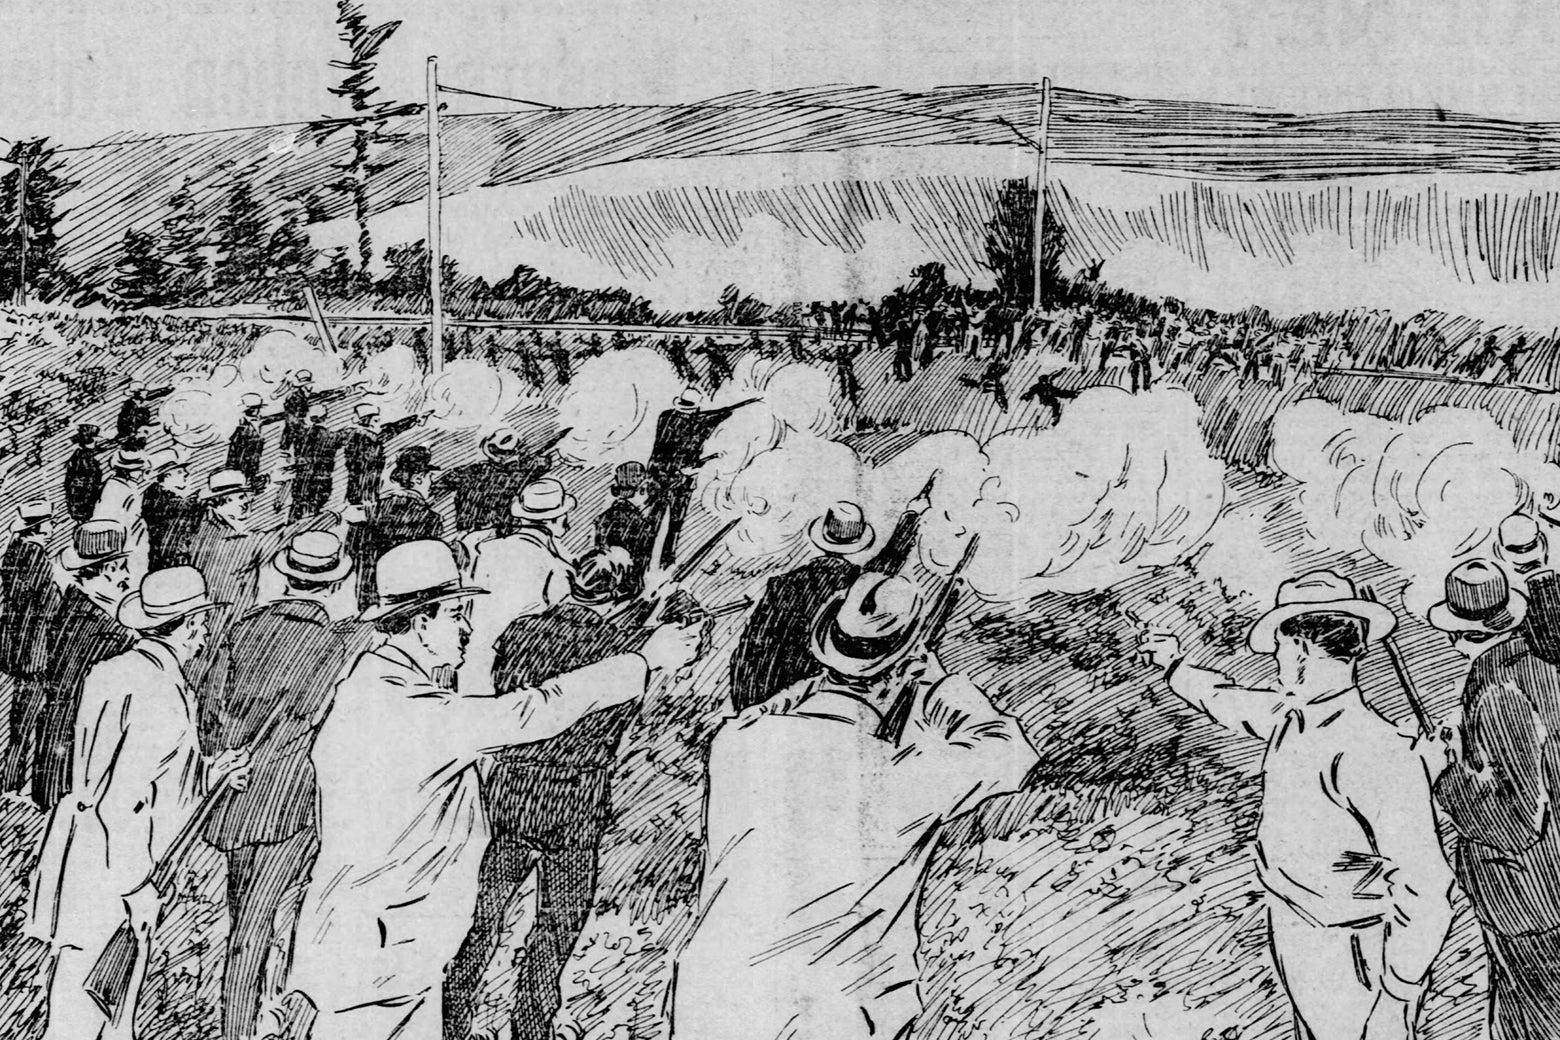 A 19th century newspaper illustration of a row of men with rifles firing into a fleeing crowd.